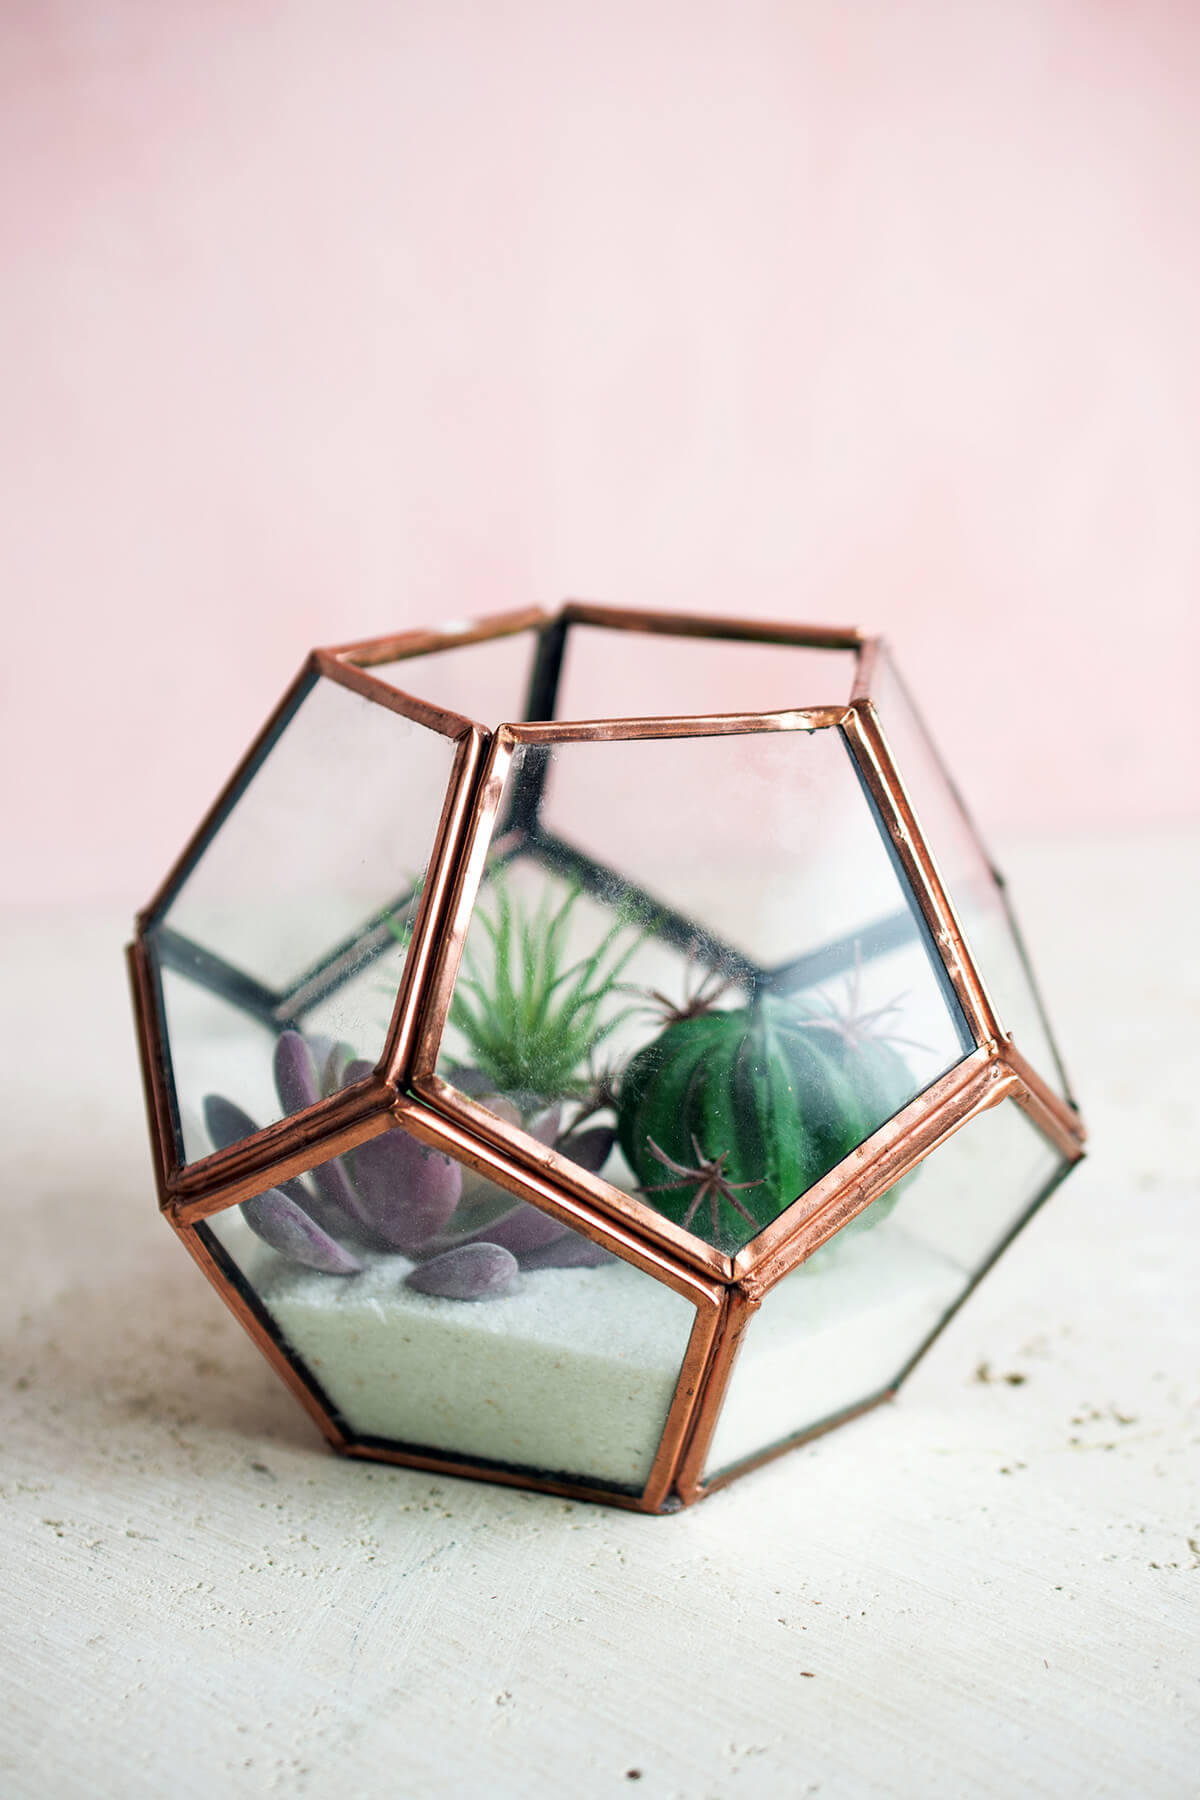 Display Dodecahedron 4.4" Copper